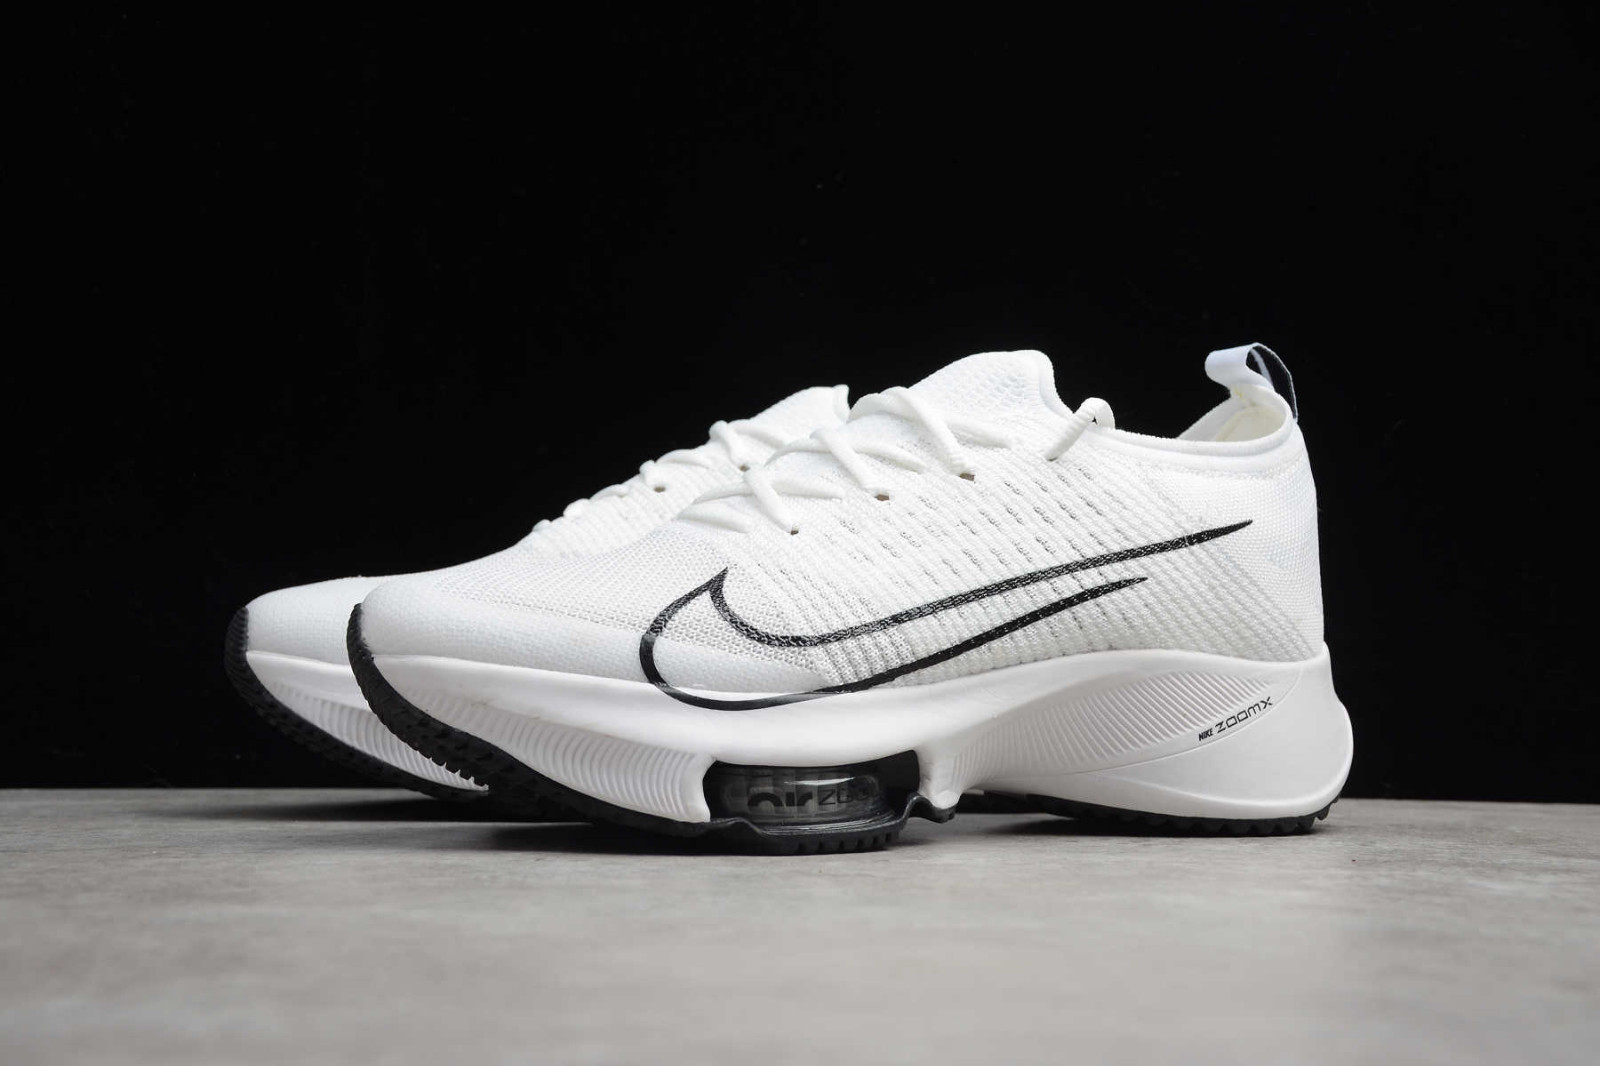 Nike Air Zoom Tempo NEXT% White Black Running Shoes BAMA CI9923 - GmarShops - New Nike Air Force 1 Low White Grey-Dark Grey Sneakers DD7113-100 004